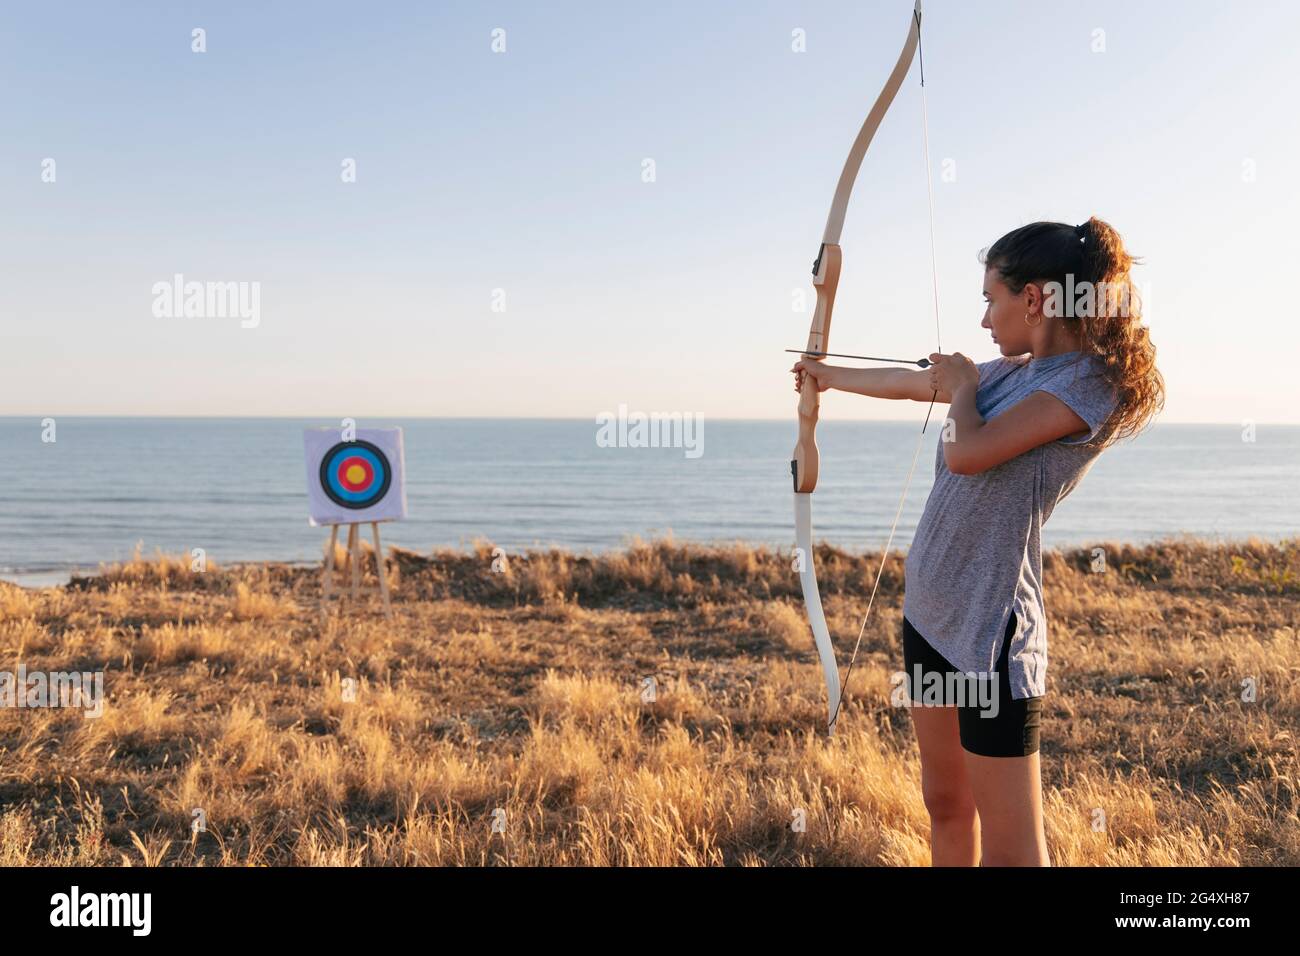 Archeress aiming at target while standing on grass during sunny day Stock Photo